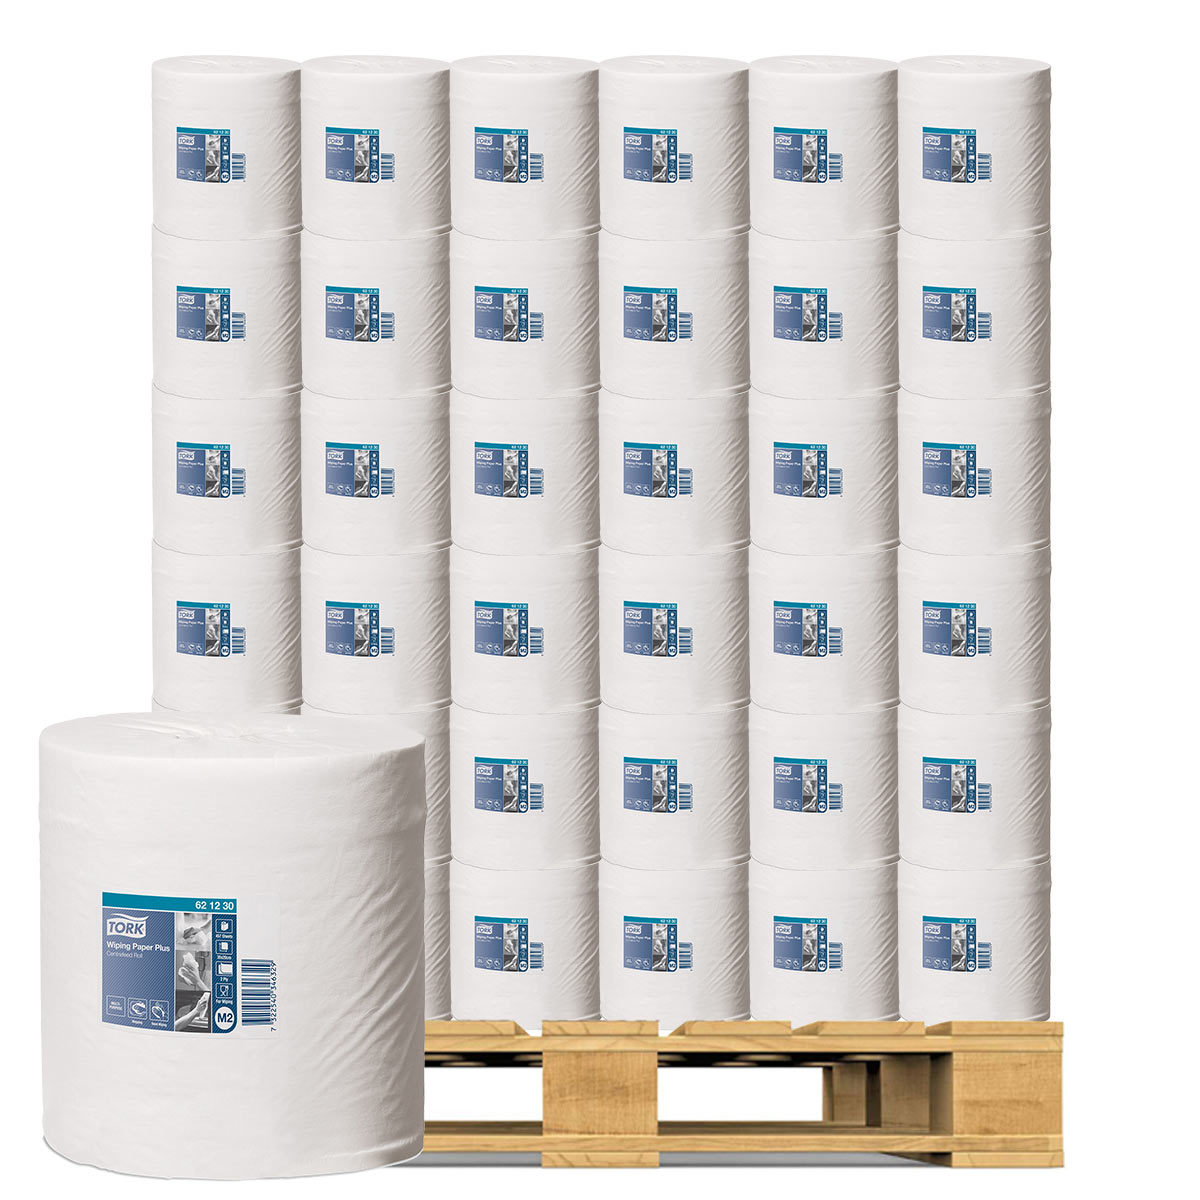 Tork Wiping Paper Plus CentreFeed in White, 6 x 157.5m Pallet Deal (30 Units)